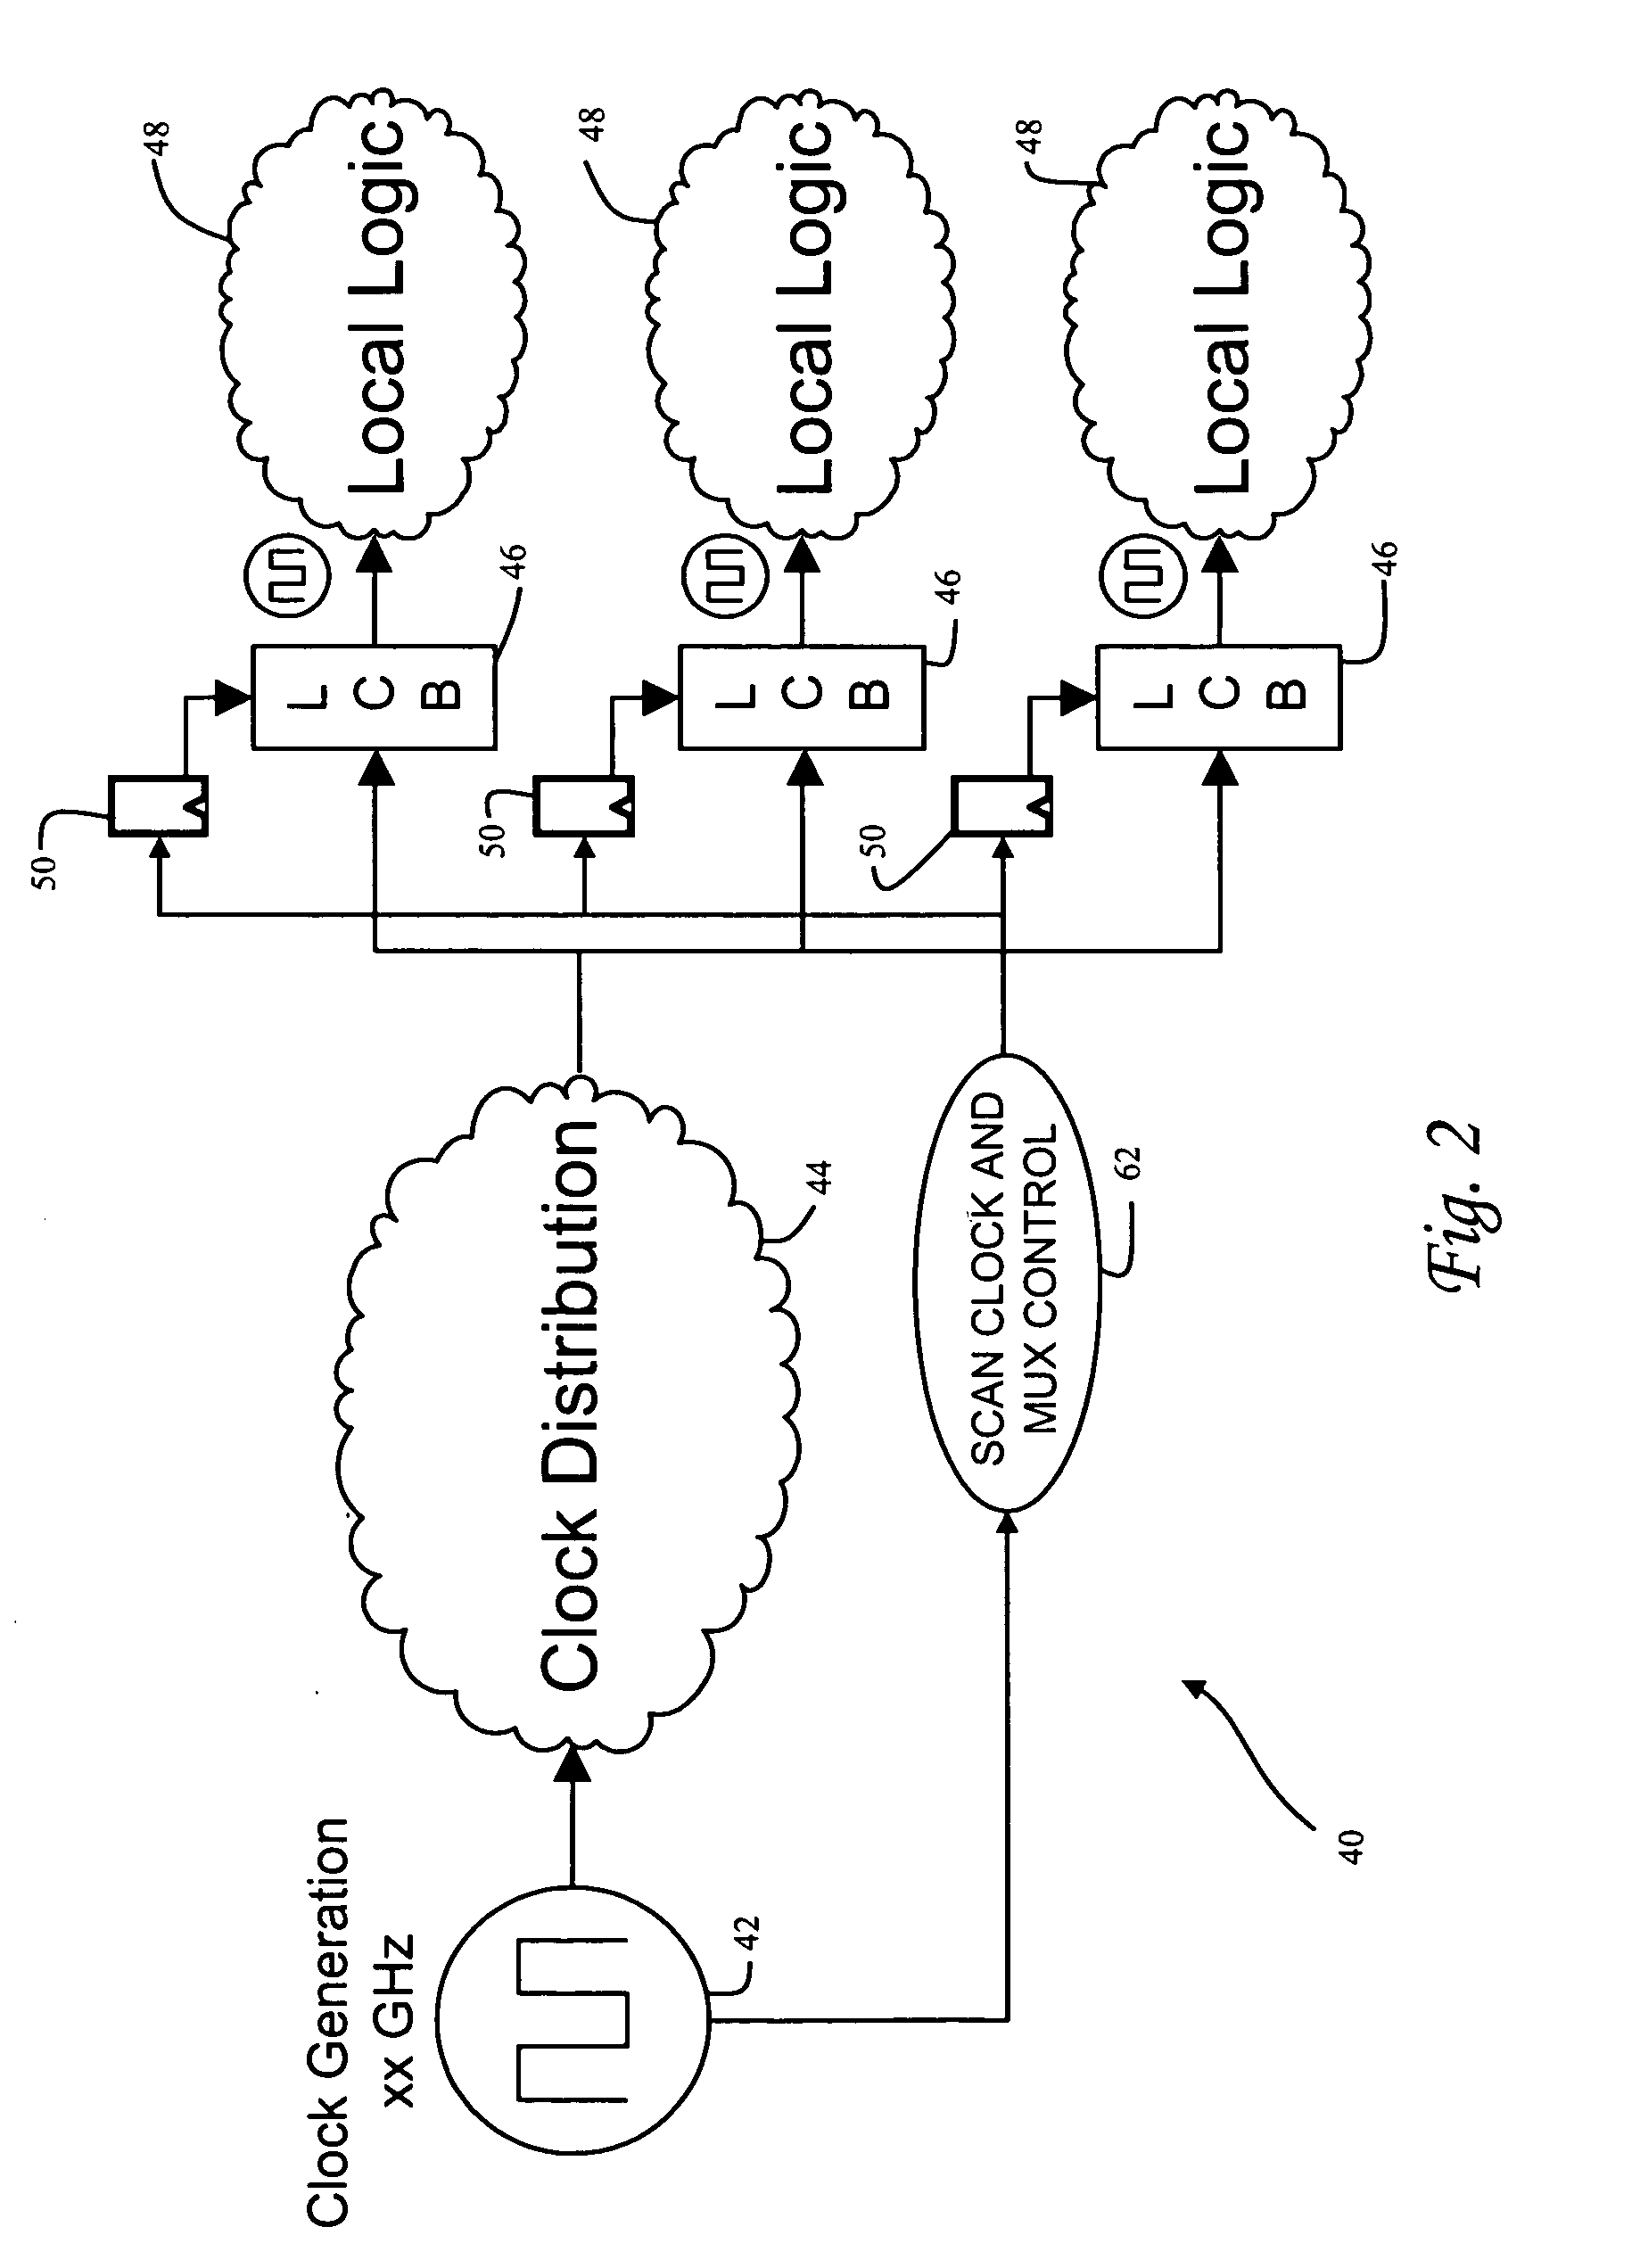 Method and apparatus for soft-error immune and self-correcting latches